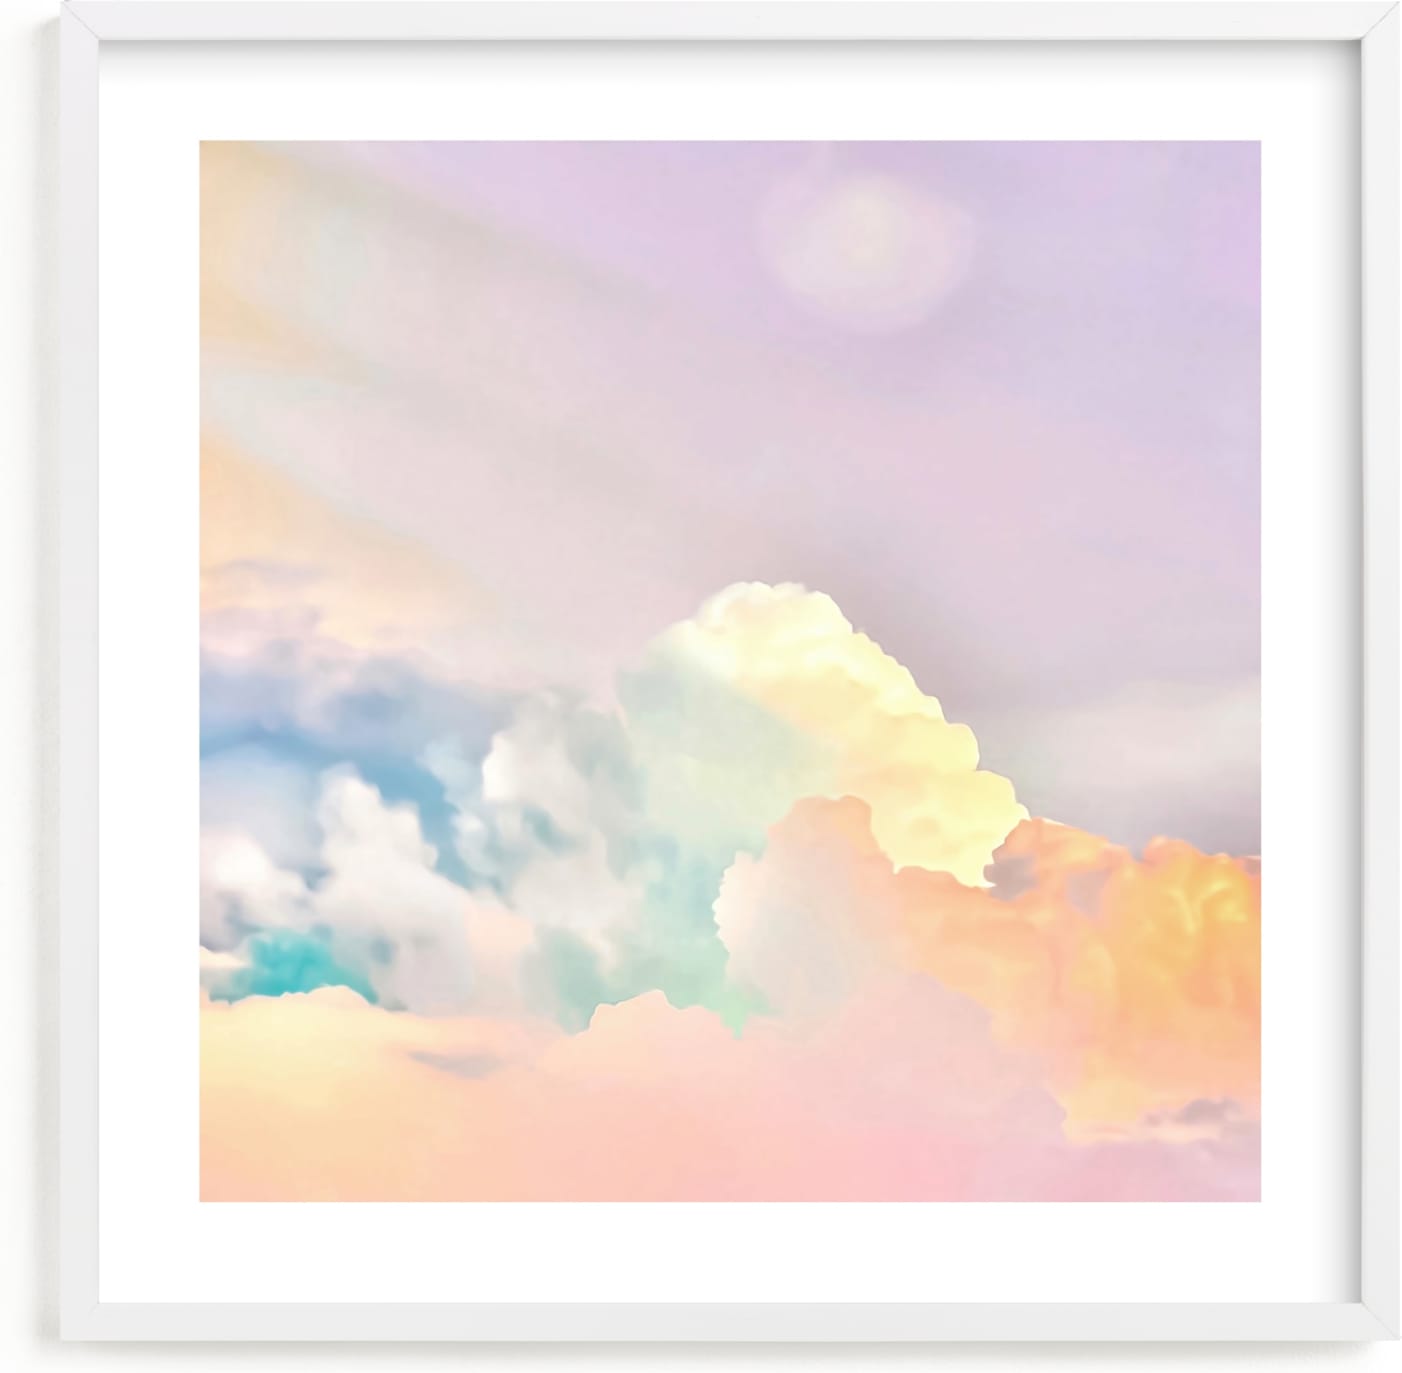 This is a purple art by Melissa Agular called Ice Cream Clouds.